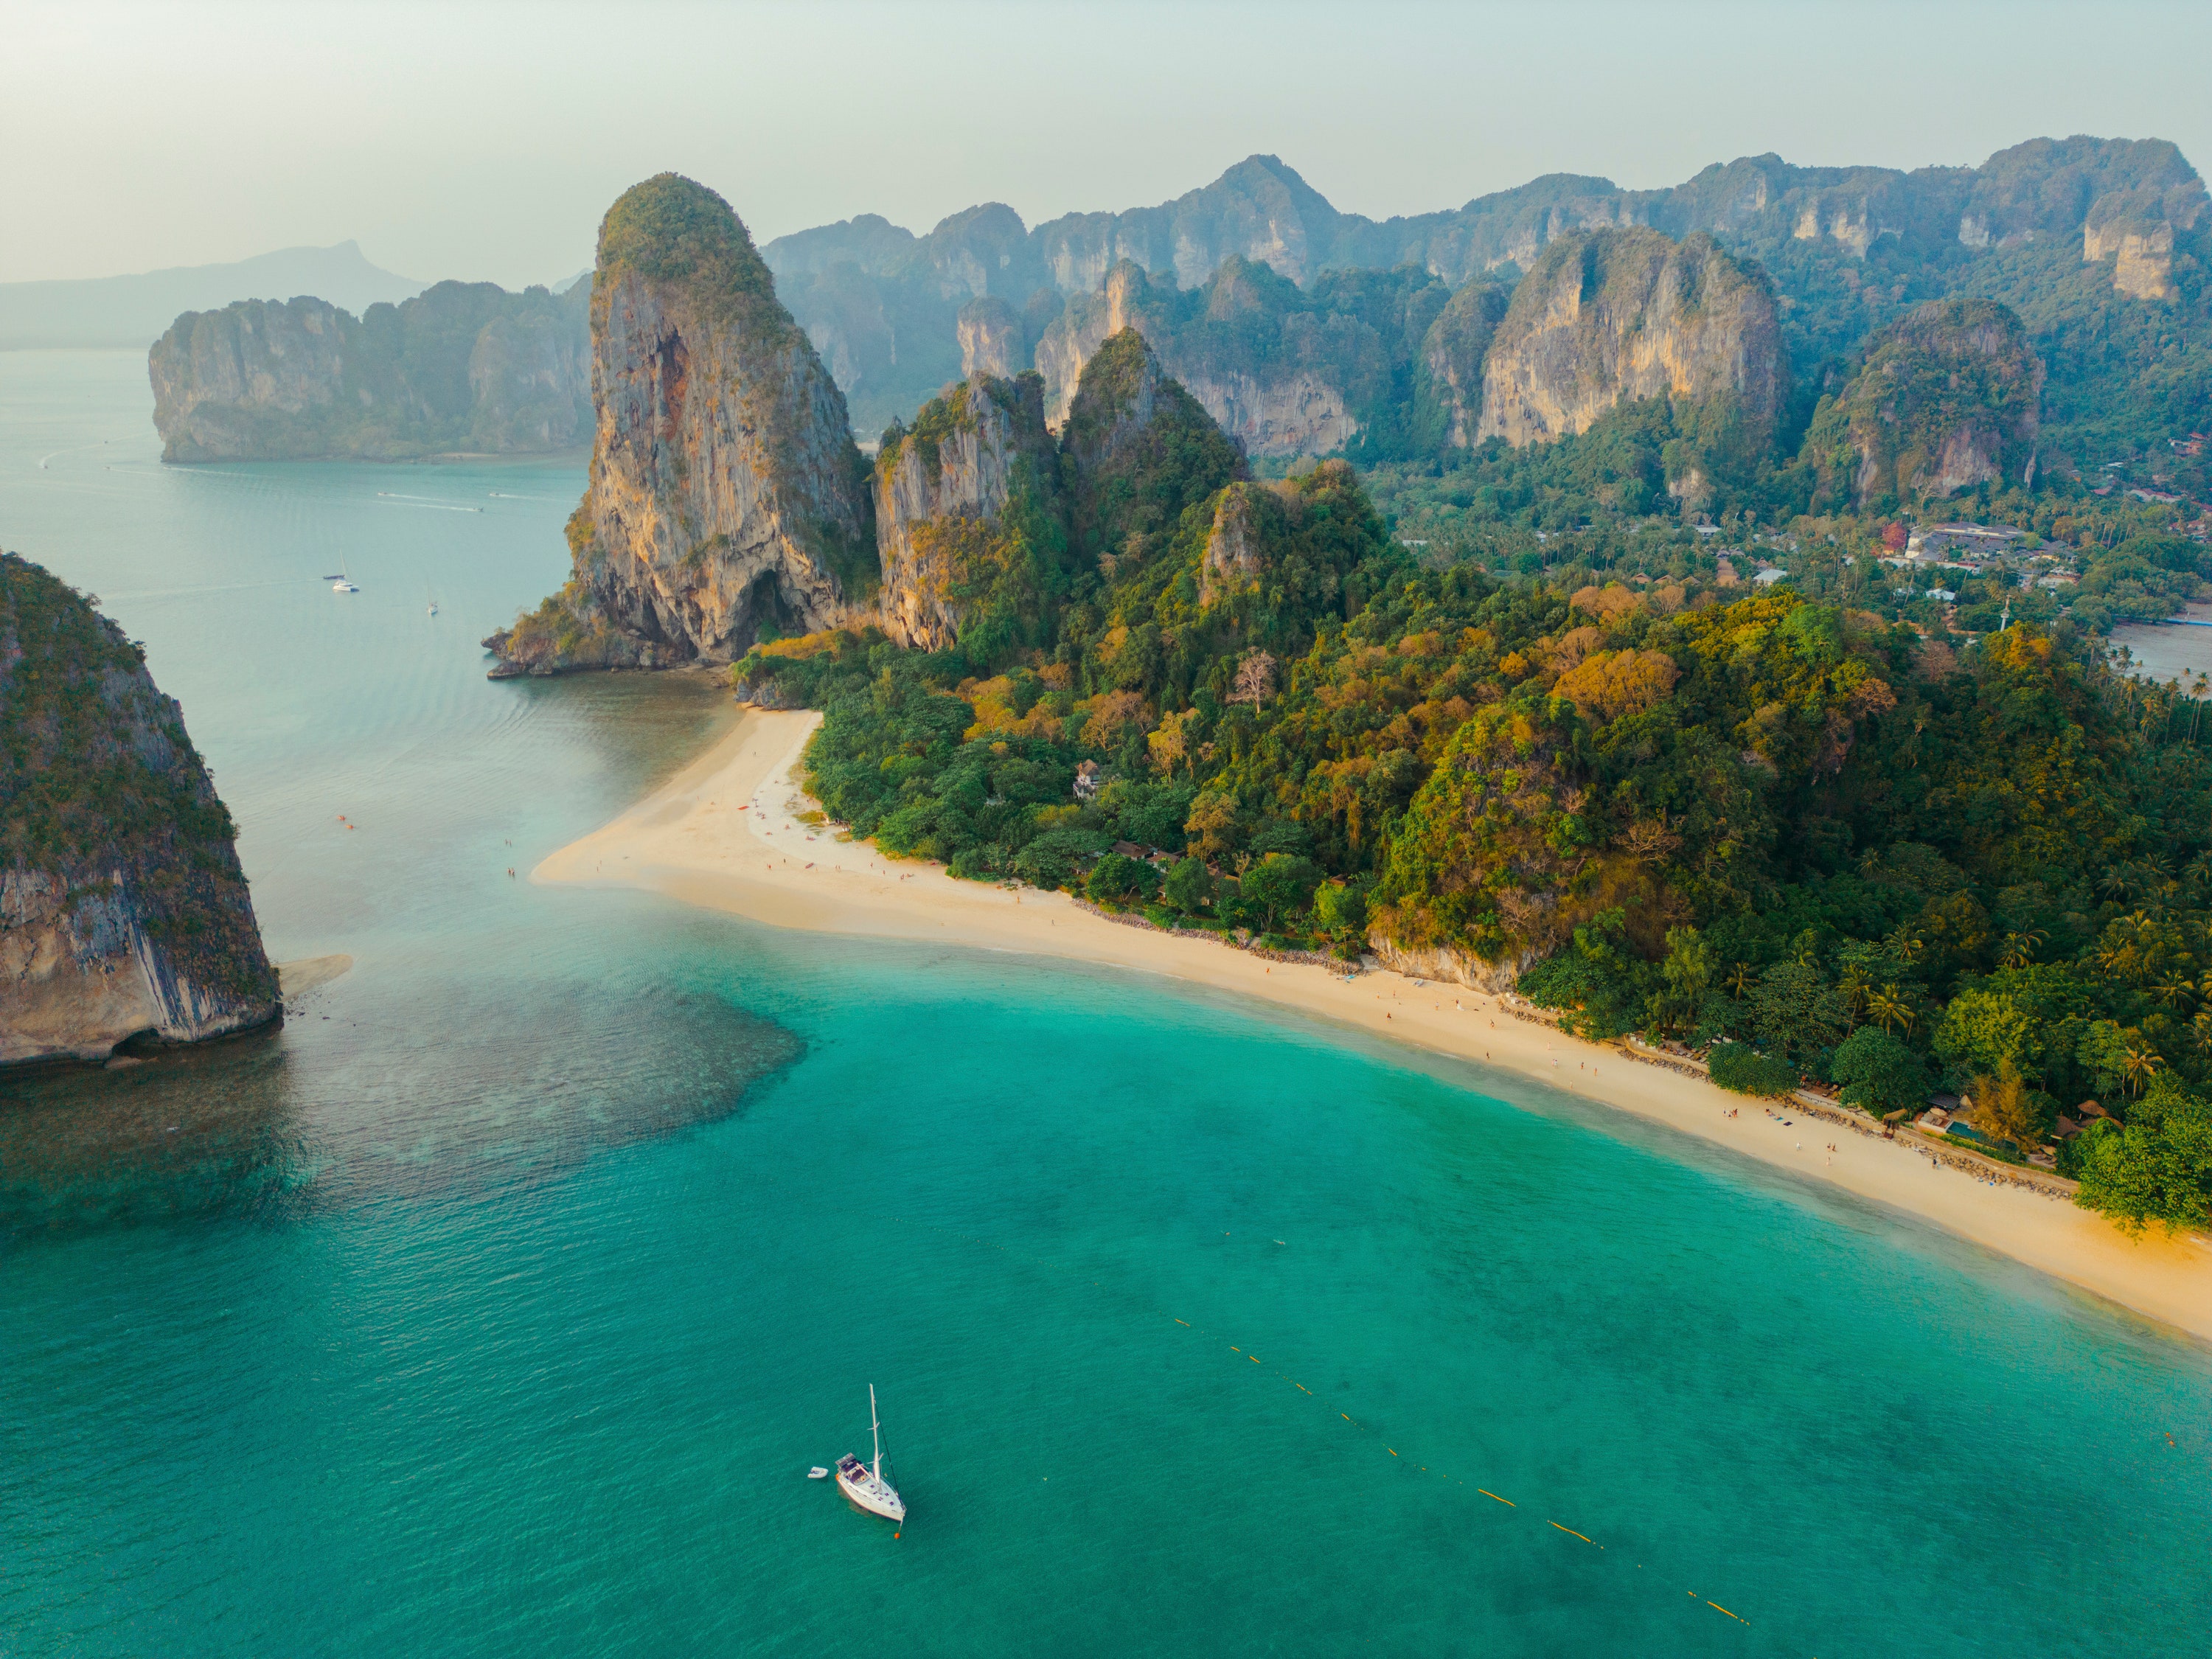 The <a href="https://www.cntraveler.com/gallery/best-beaches-in-thailand?mbid=synd_msn_rss&utm_source=msn&utm_medium=syndication">Gulf of Thailand</a> offers lovely year-round sailing conditions, making it an accessible and exciting destination for both beginner and advanced sailors. Most sailing schools and marinas in Thailand are based in Pattaya. <a href="https://sailingschoolthailand.com/sailing-courses/zero-to-hero-info/">Island Spirit Sailing Schoo</a>l offers an eleven-day “zero to hero” course that combines crew and skipper training, including land-based and overnight sea lessons.<p>Sign up to receive the latest news, expert tips, and inspiration on all things travel</p><a href="https://www.cntraveler.com/newsletter/the-daily?sourceCode=msnsend">Inspire Me</a>